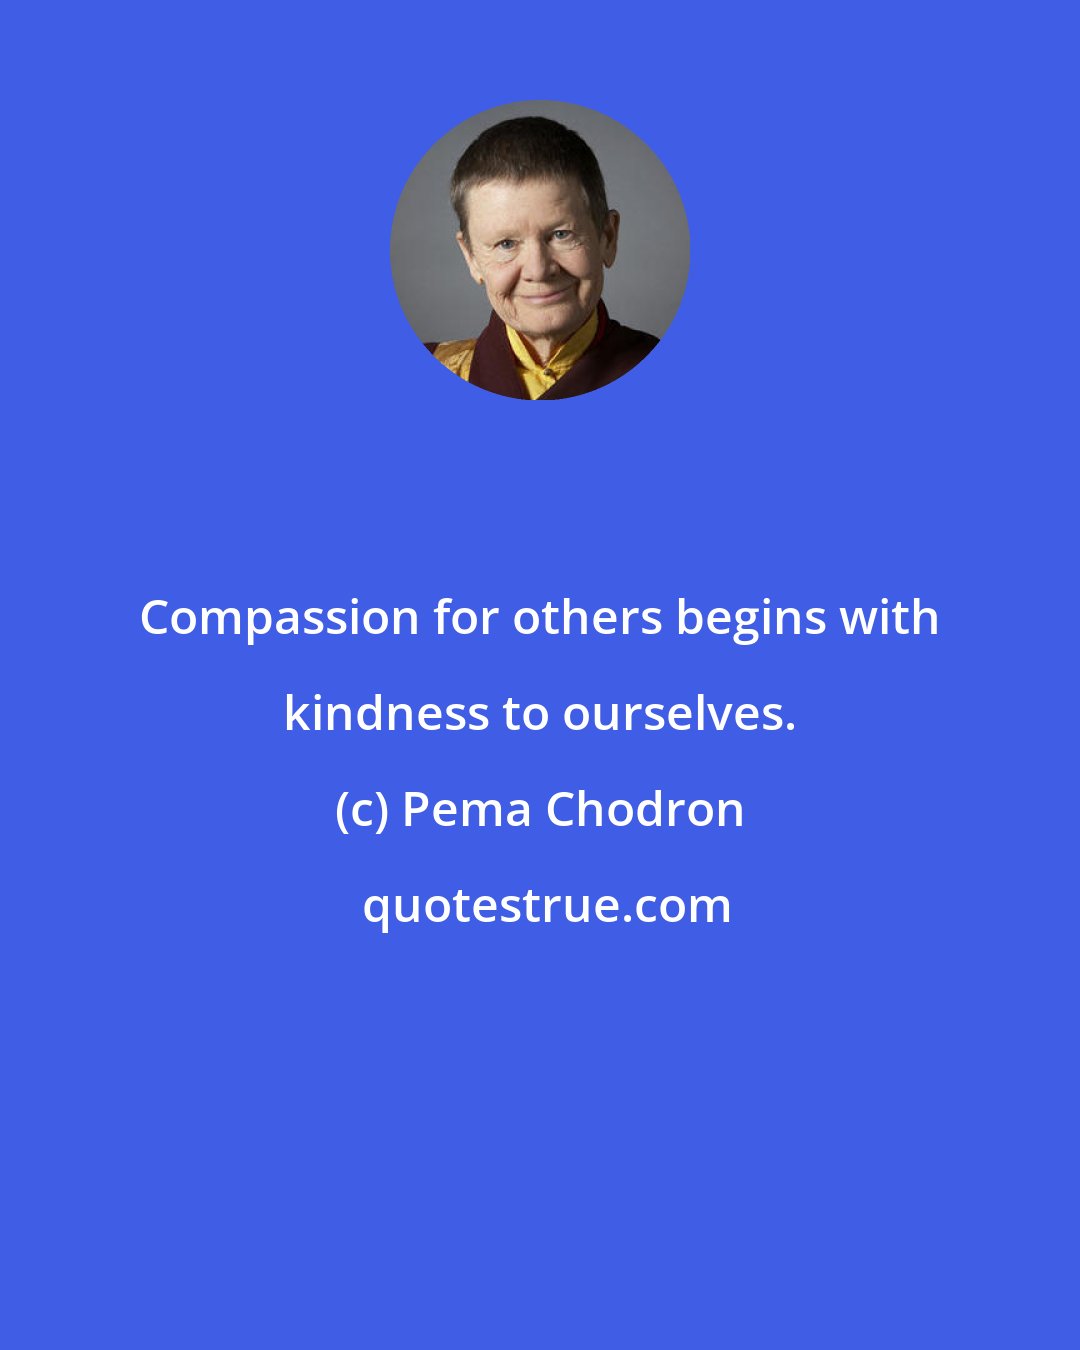 Pema Chodron: Compassion for others begins with kindness to ourselves.